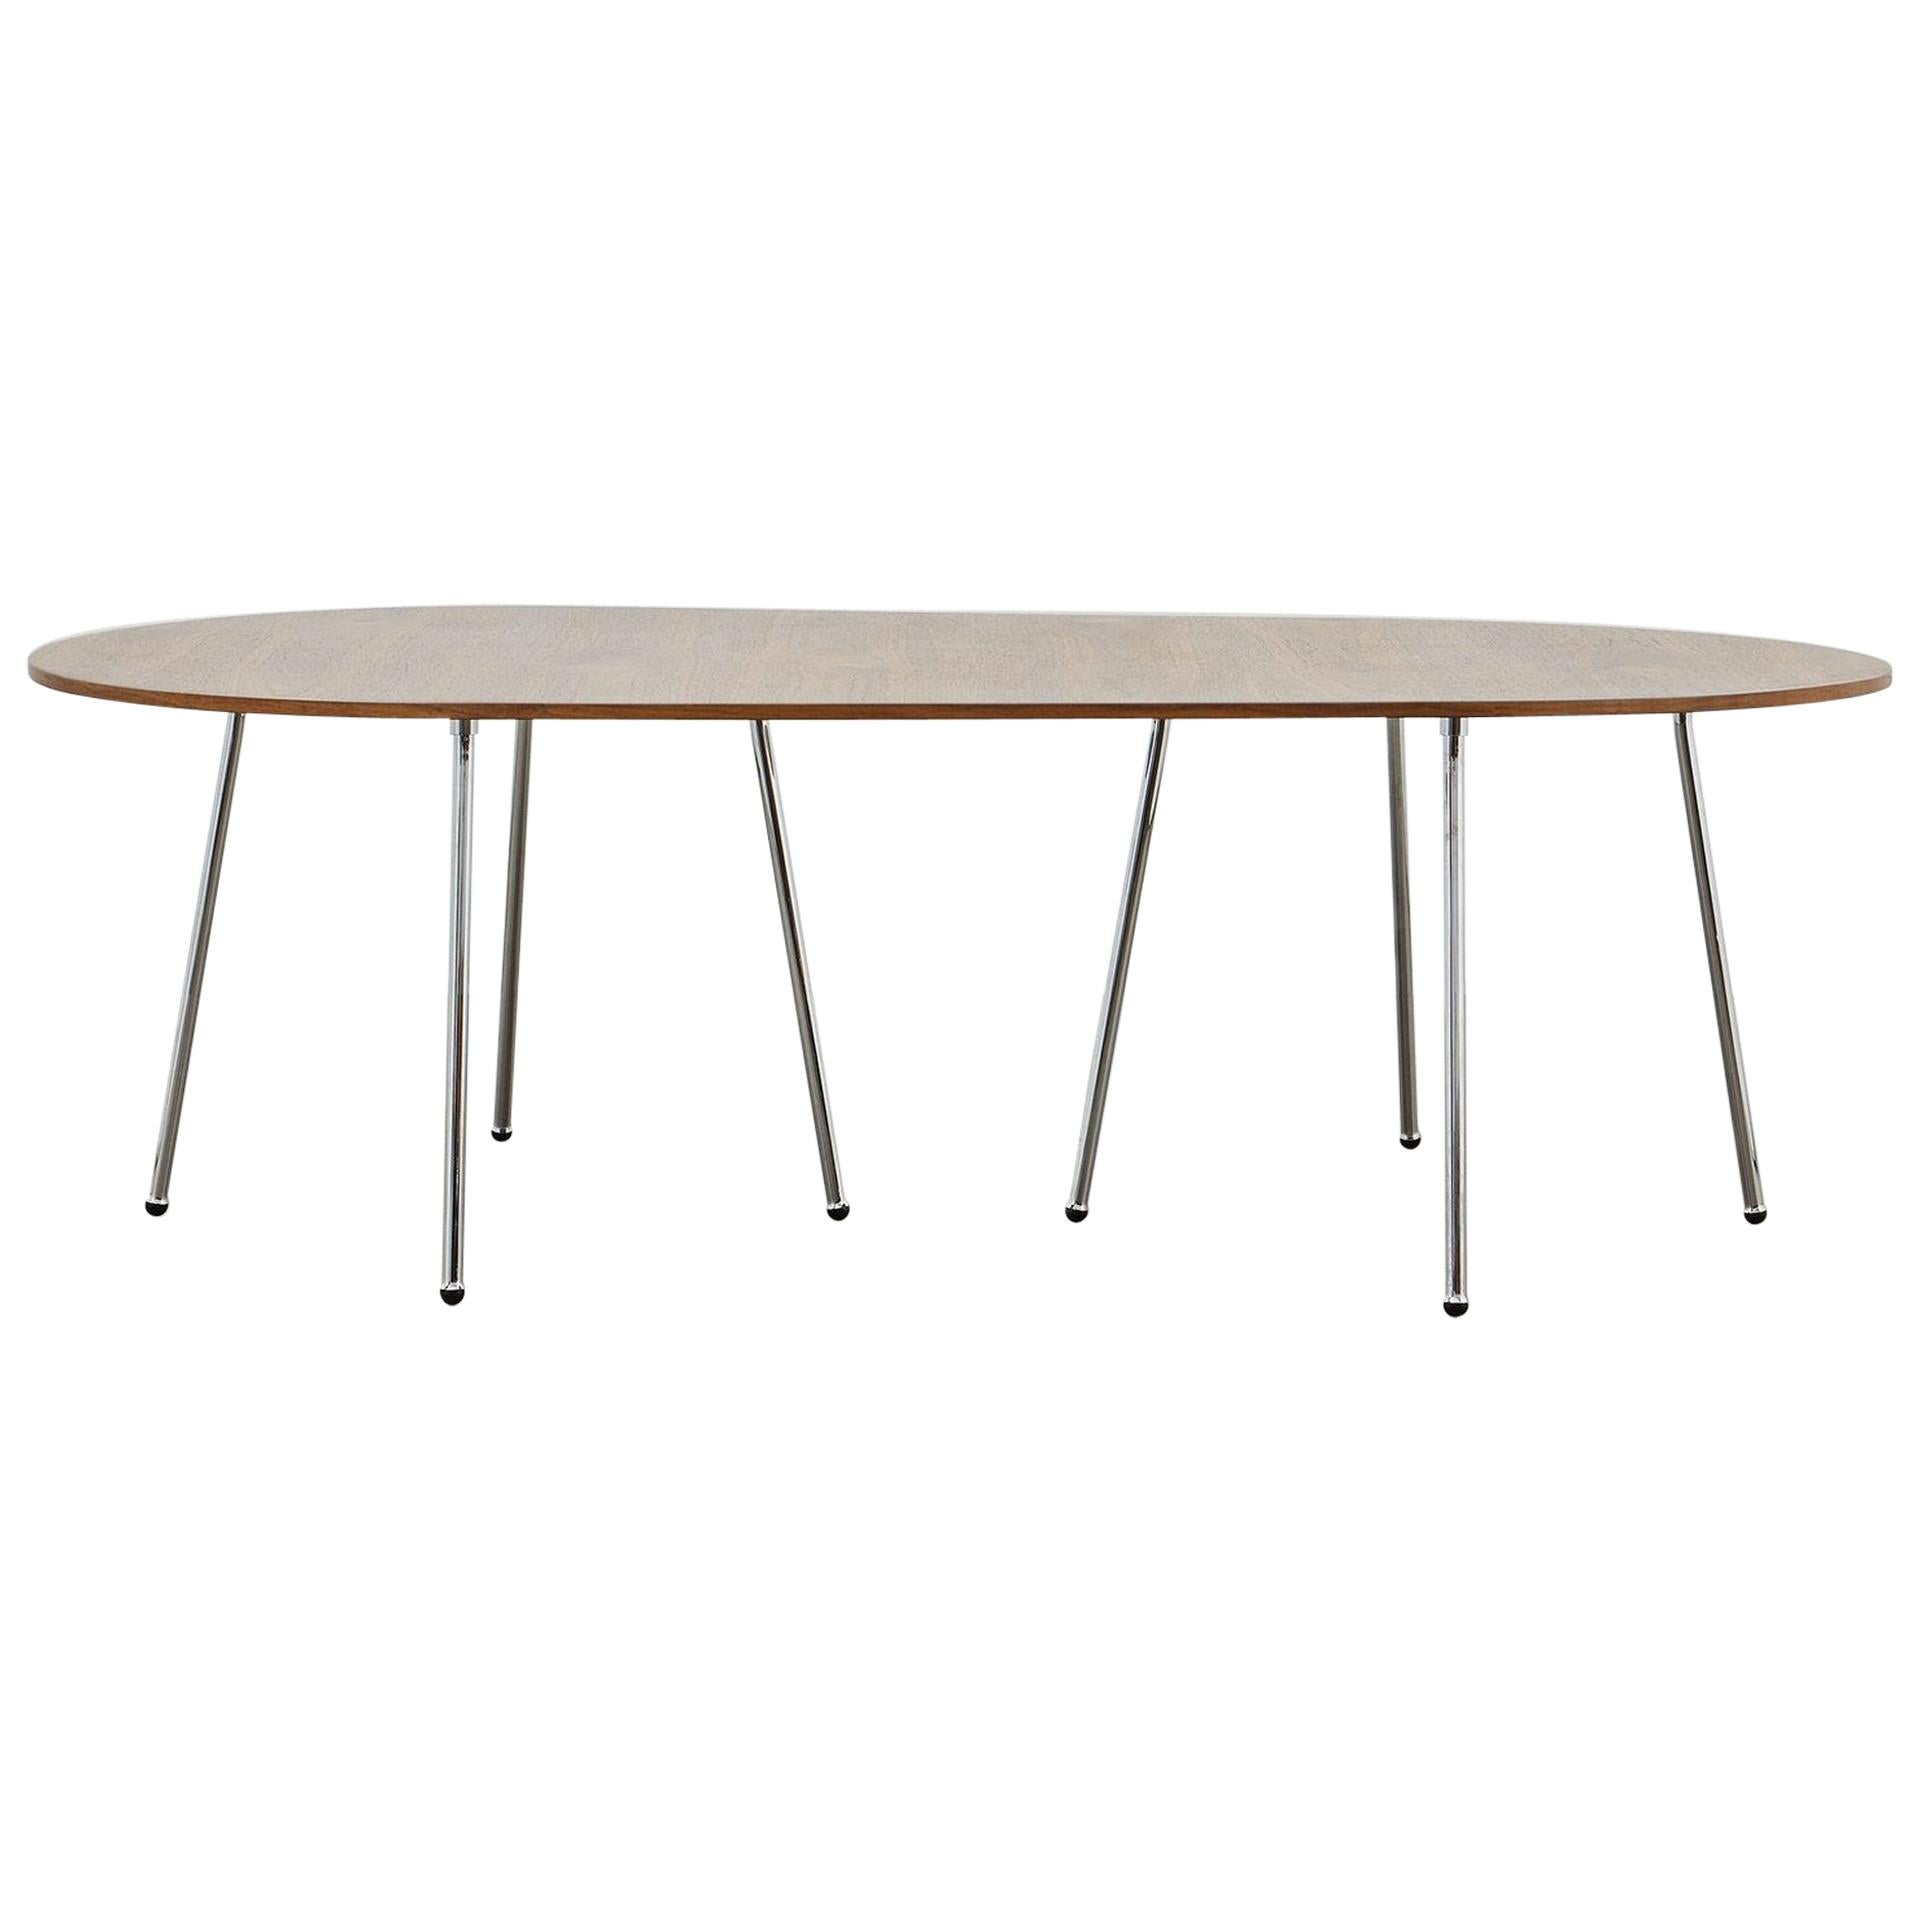 PH Dining Table, 1270x2370mm, chrome, natural oak veneer table plate and edge For Sale